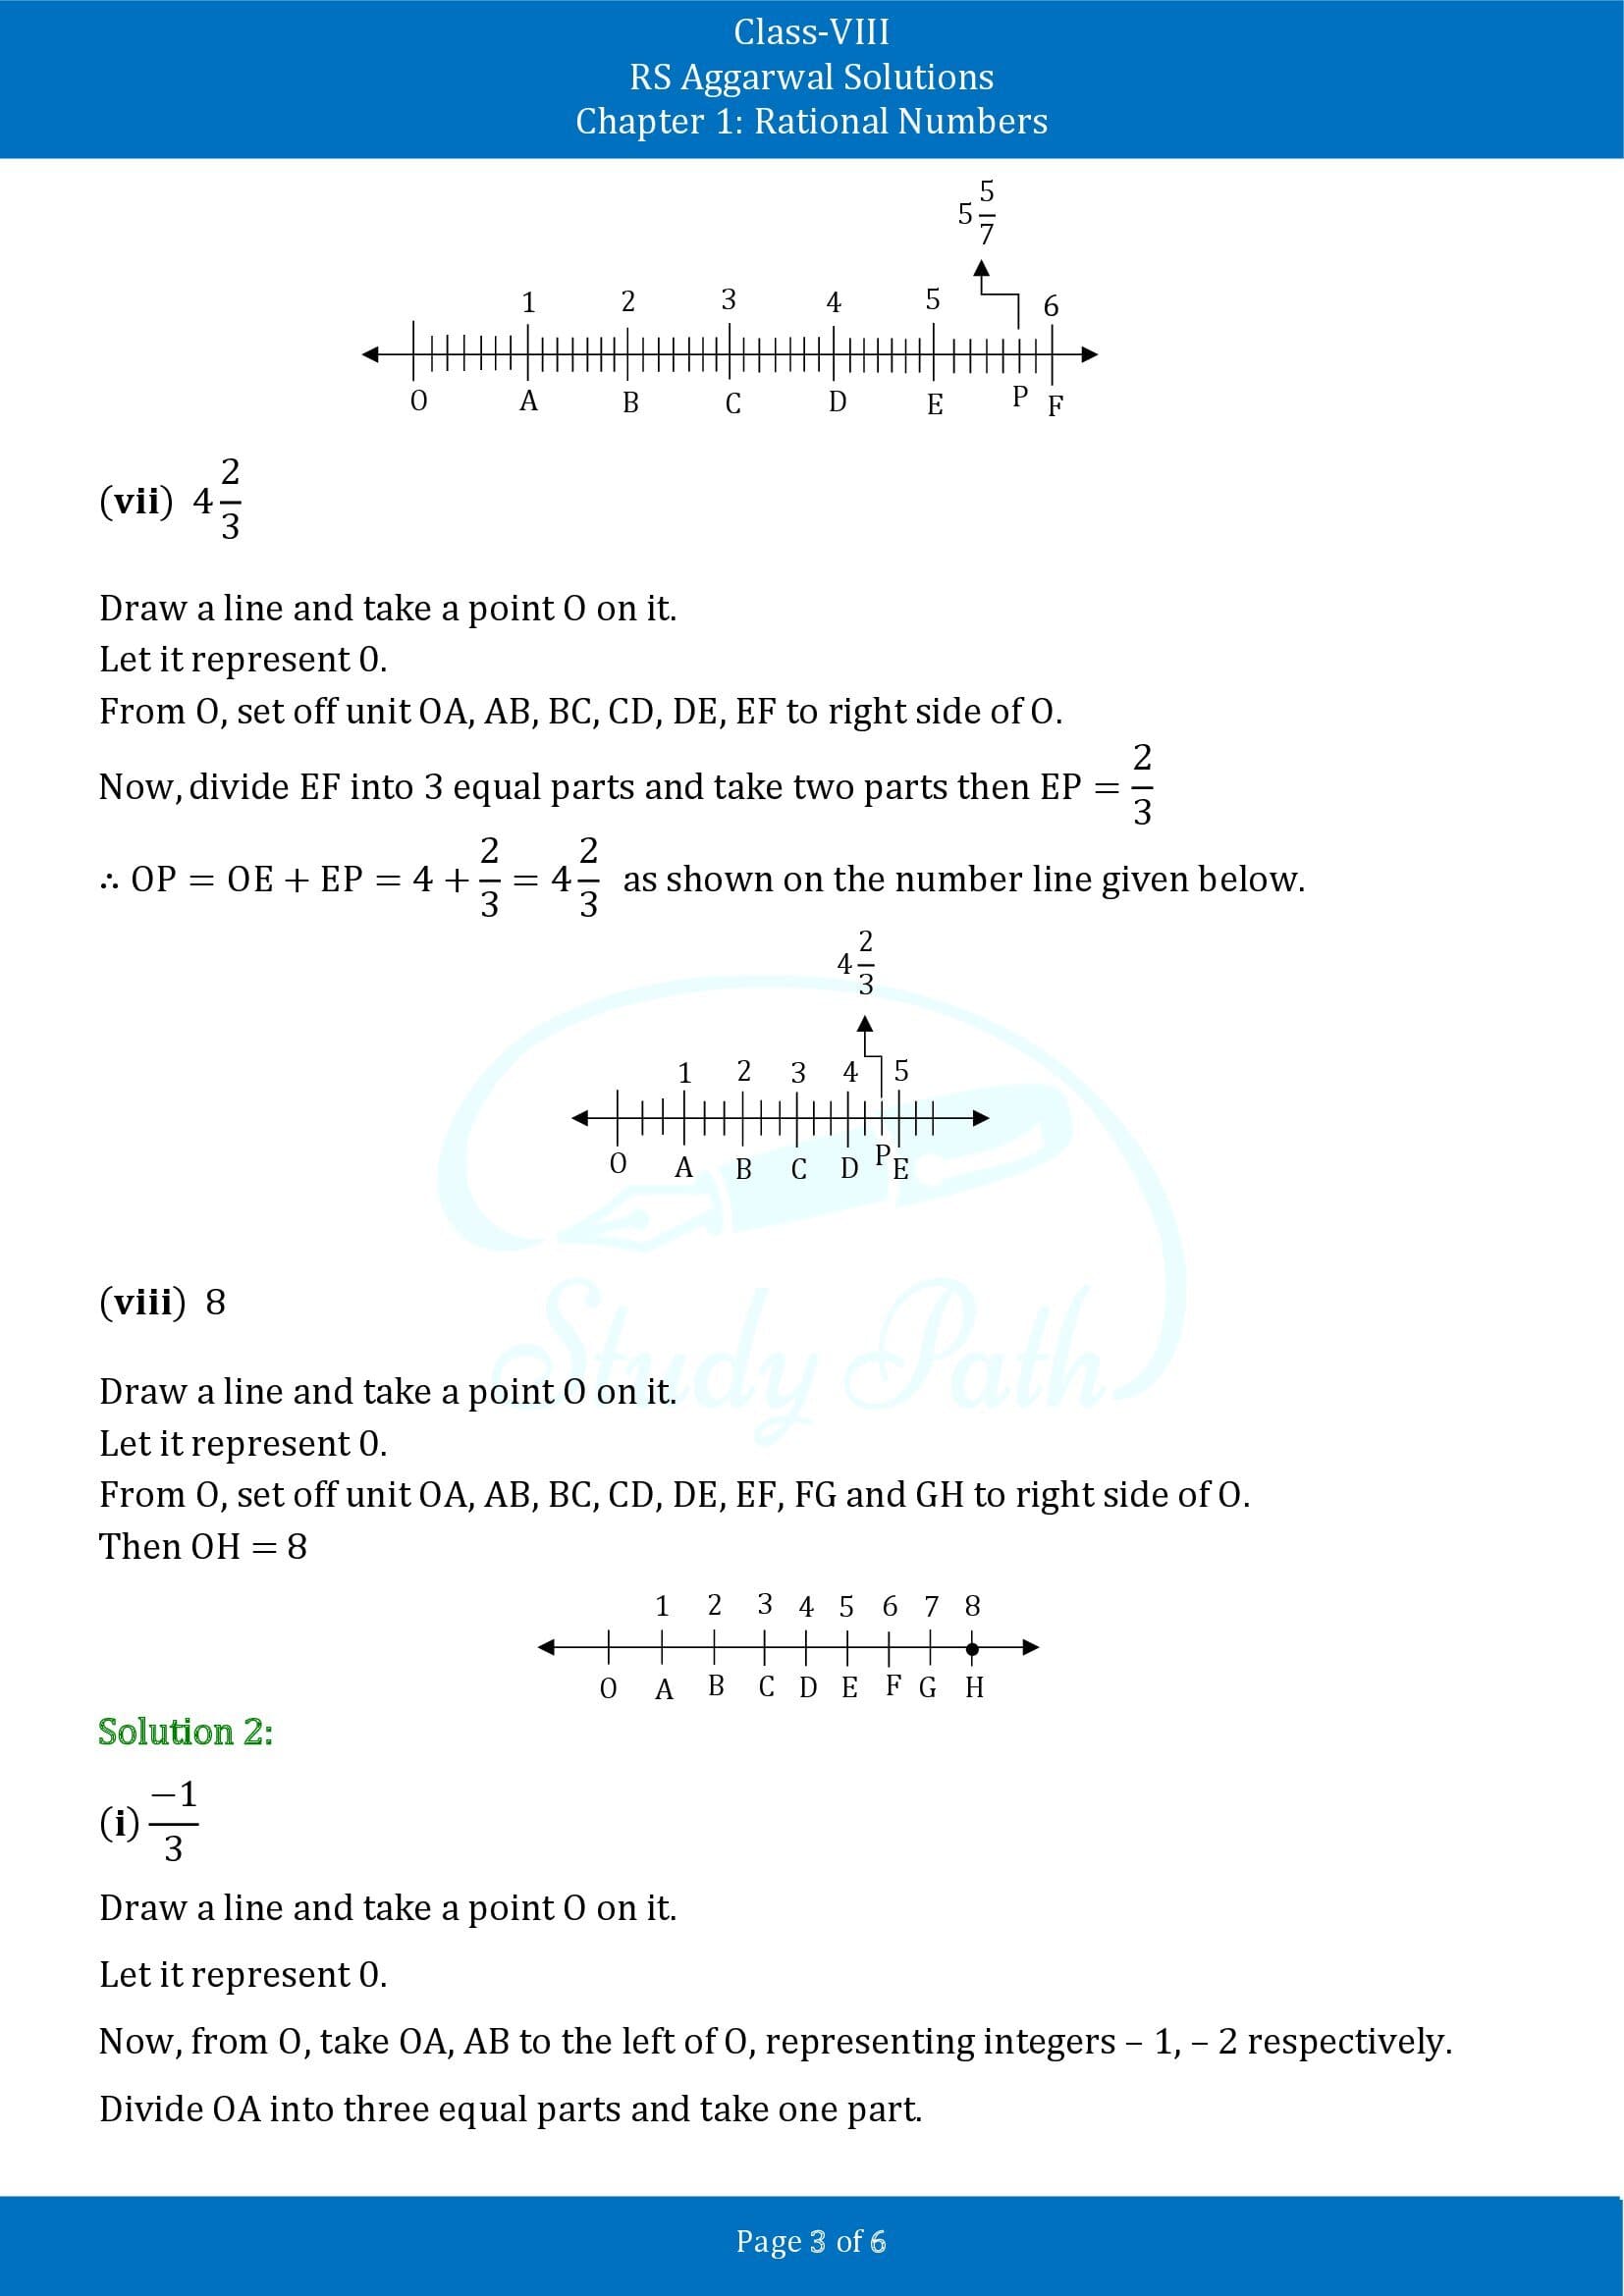 RS Aggarwal Solutions Class 8 Chapter 1 Rational Numbers Exercise 1B 00003